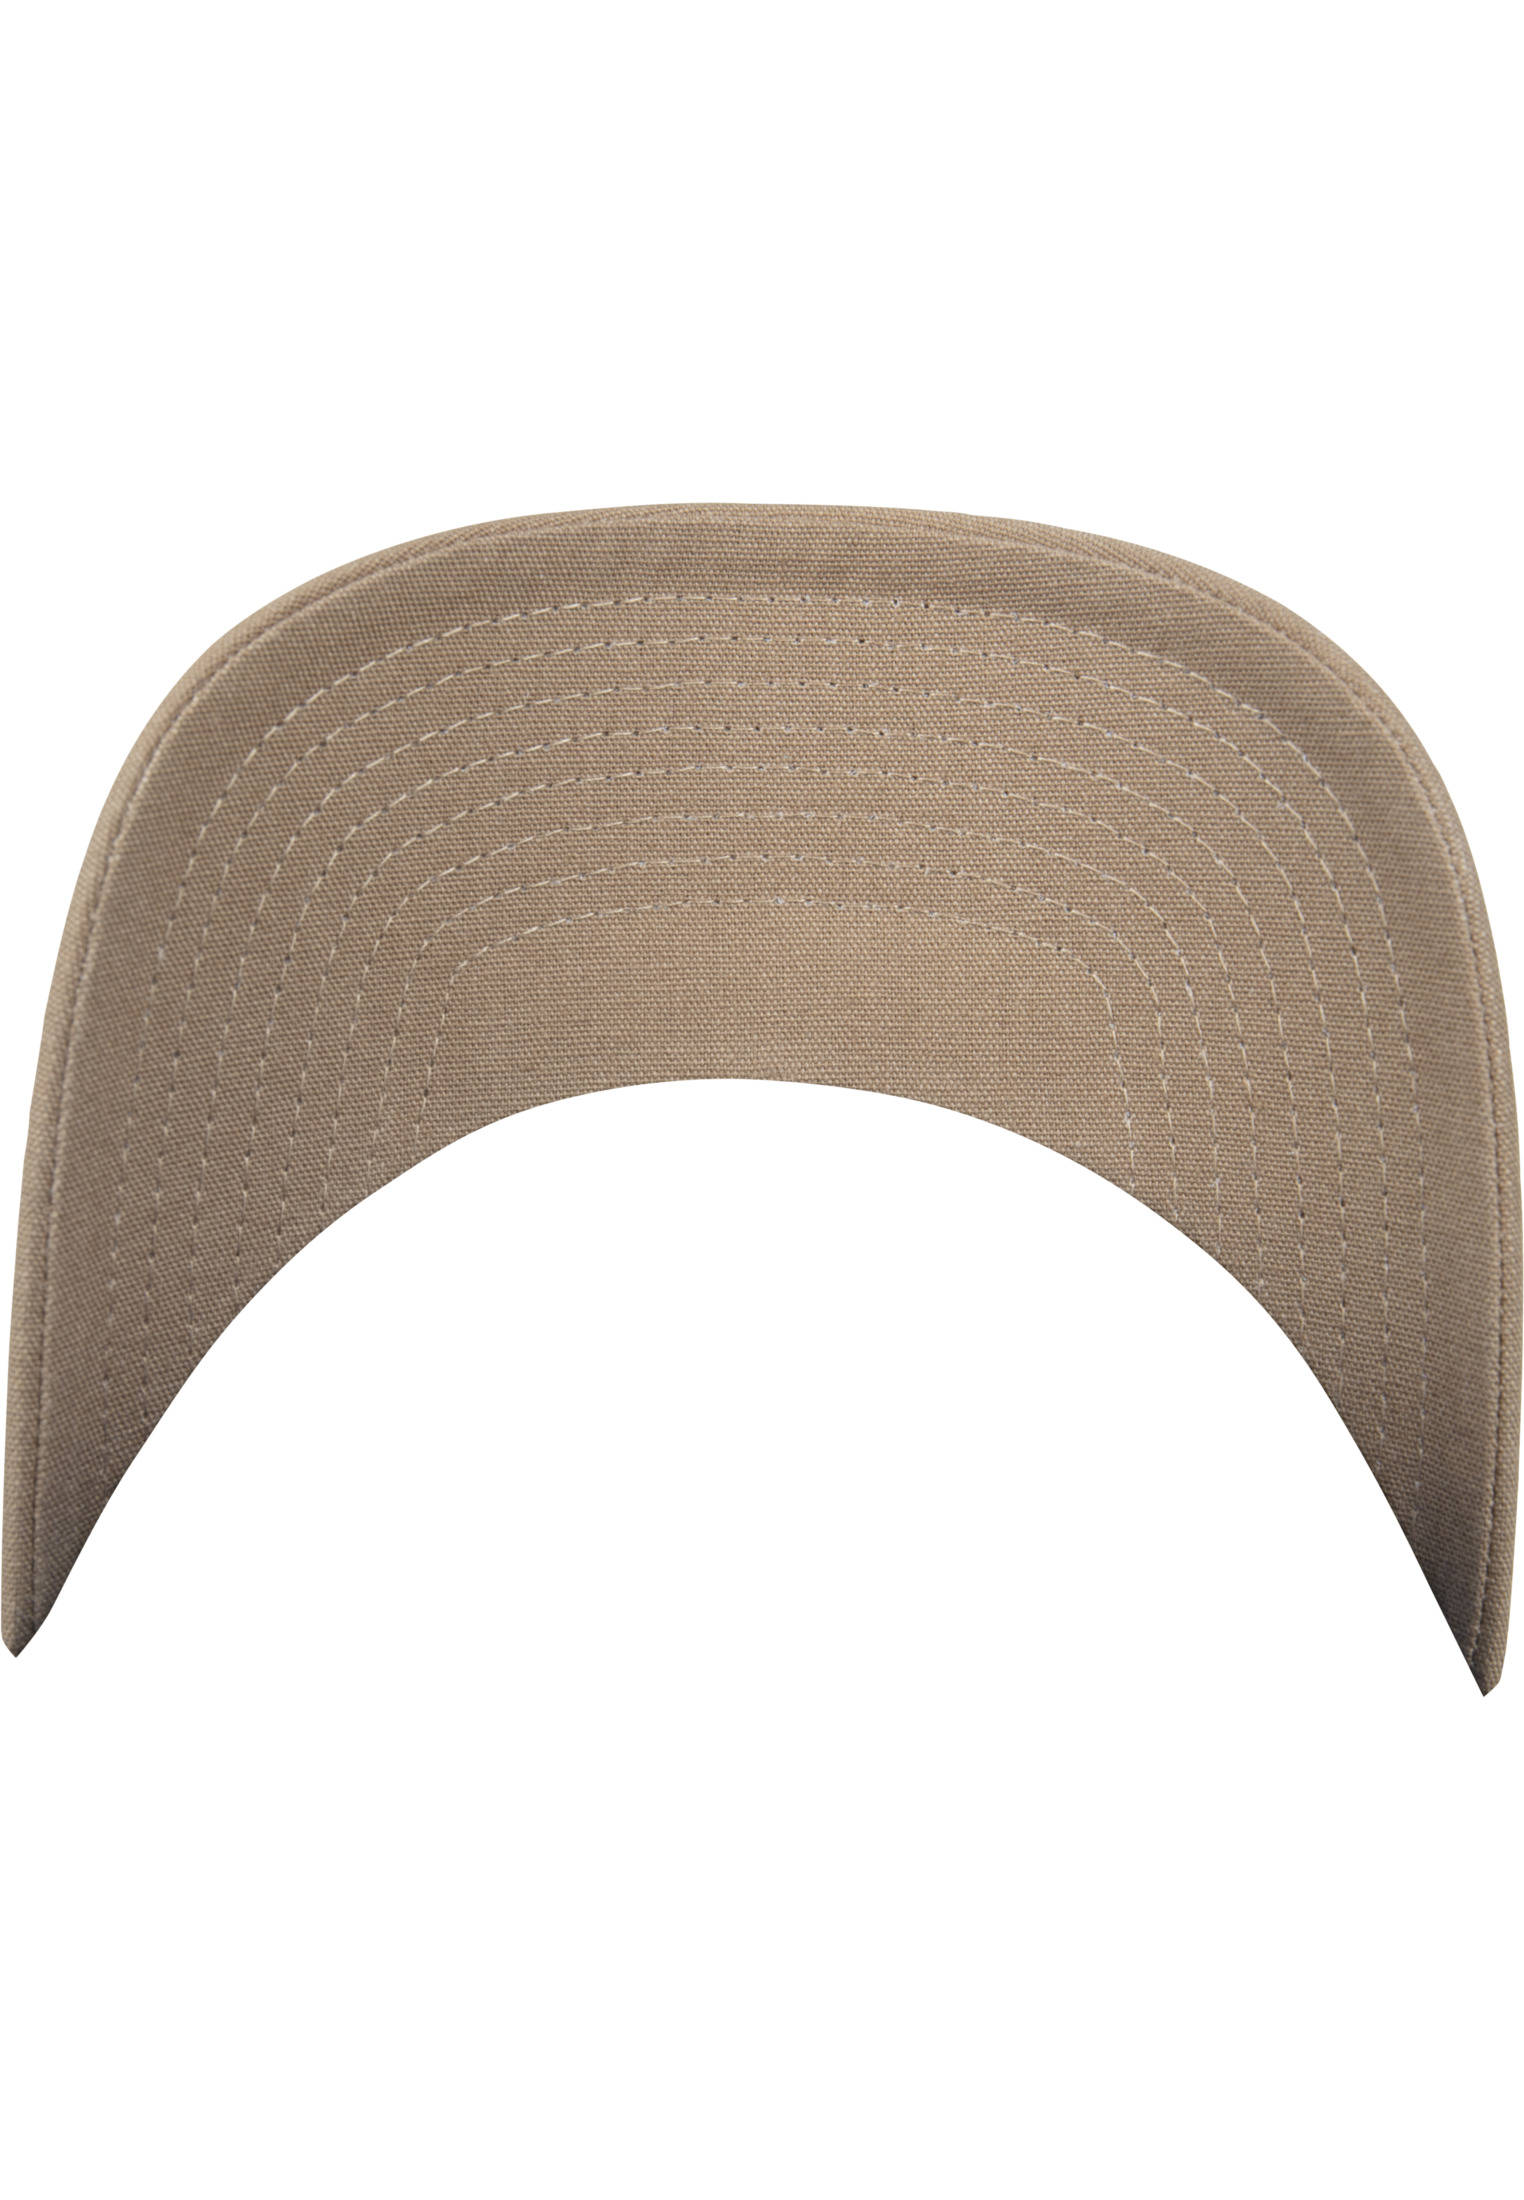 Metal Curved 6-Panel Snap-7708MS